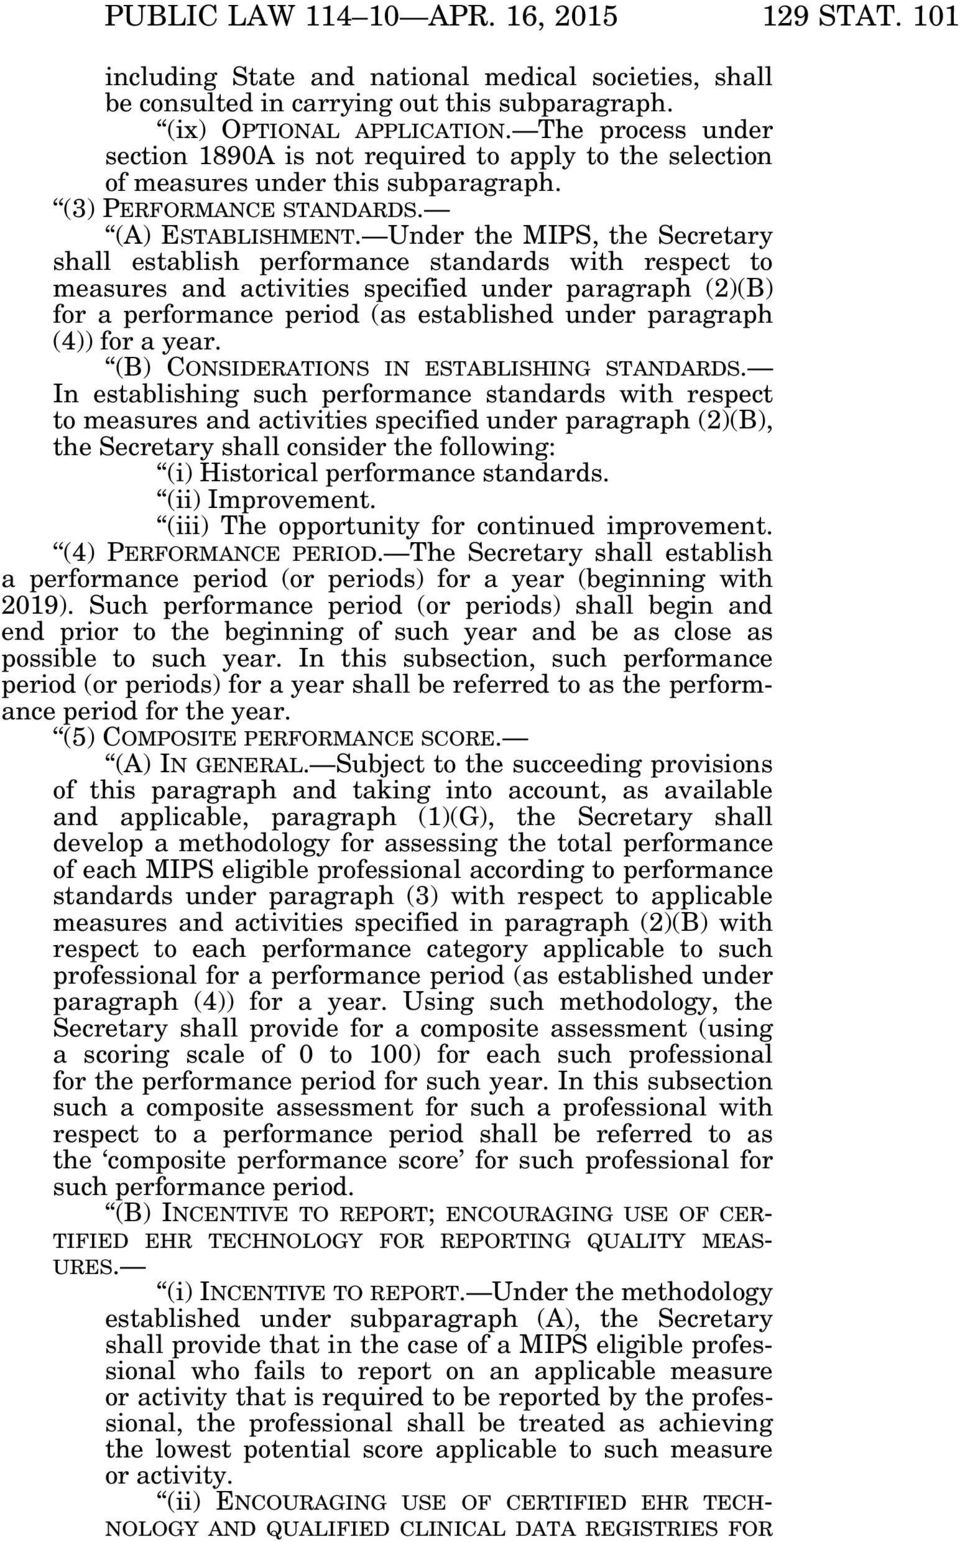 Under the MIPS, the Secretary shall establish performance standards with respect to measures and activities specified under paragraph (2)(B) for a performance period (as established under paragraph